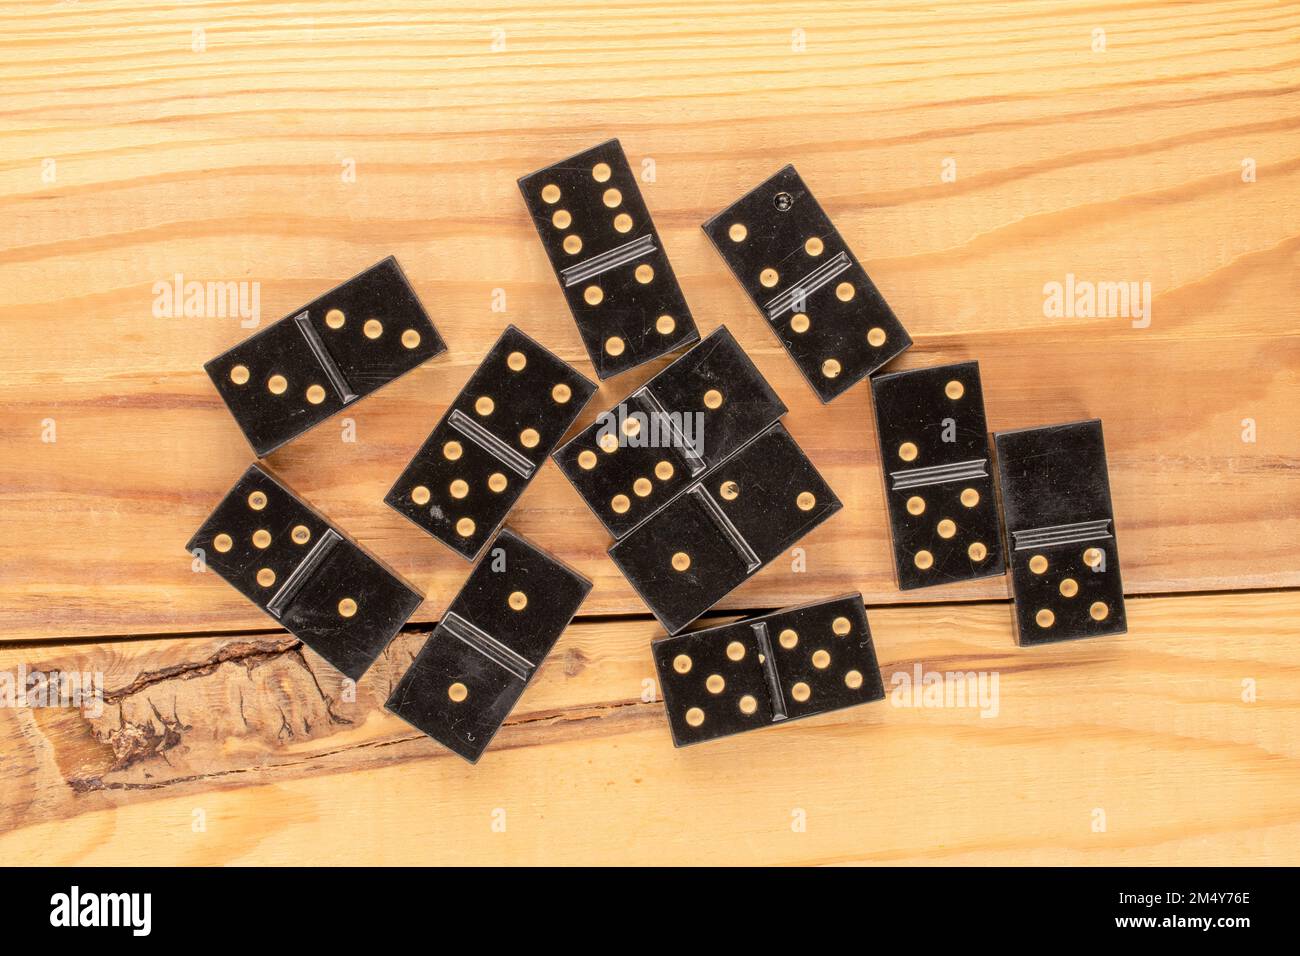 Several dominoes on a wooden table, macro, top view. Stock Photo